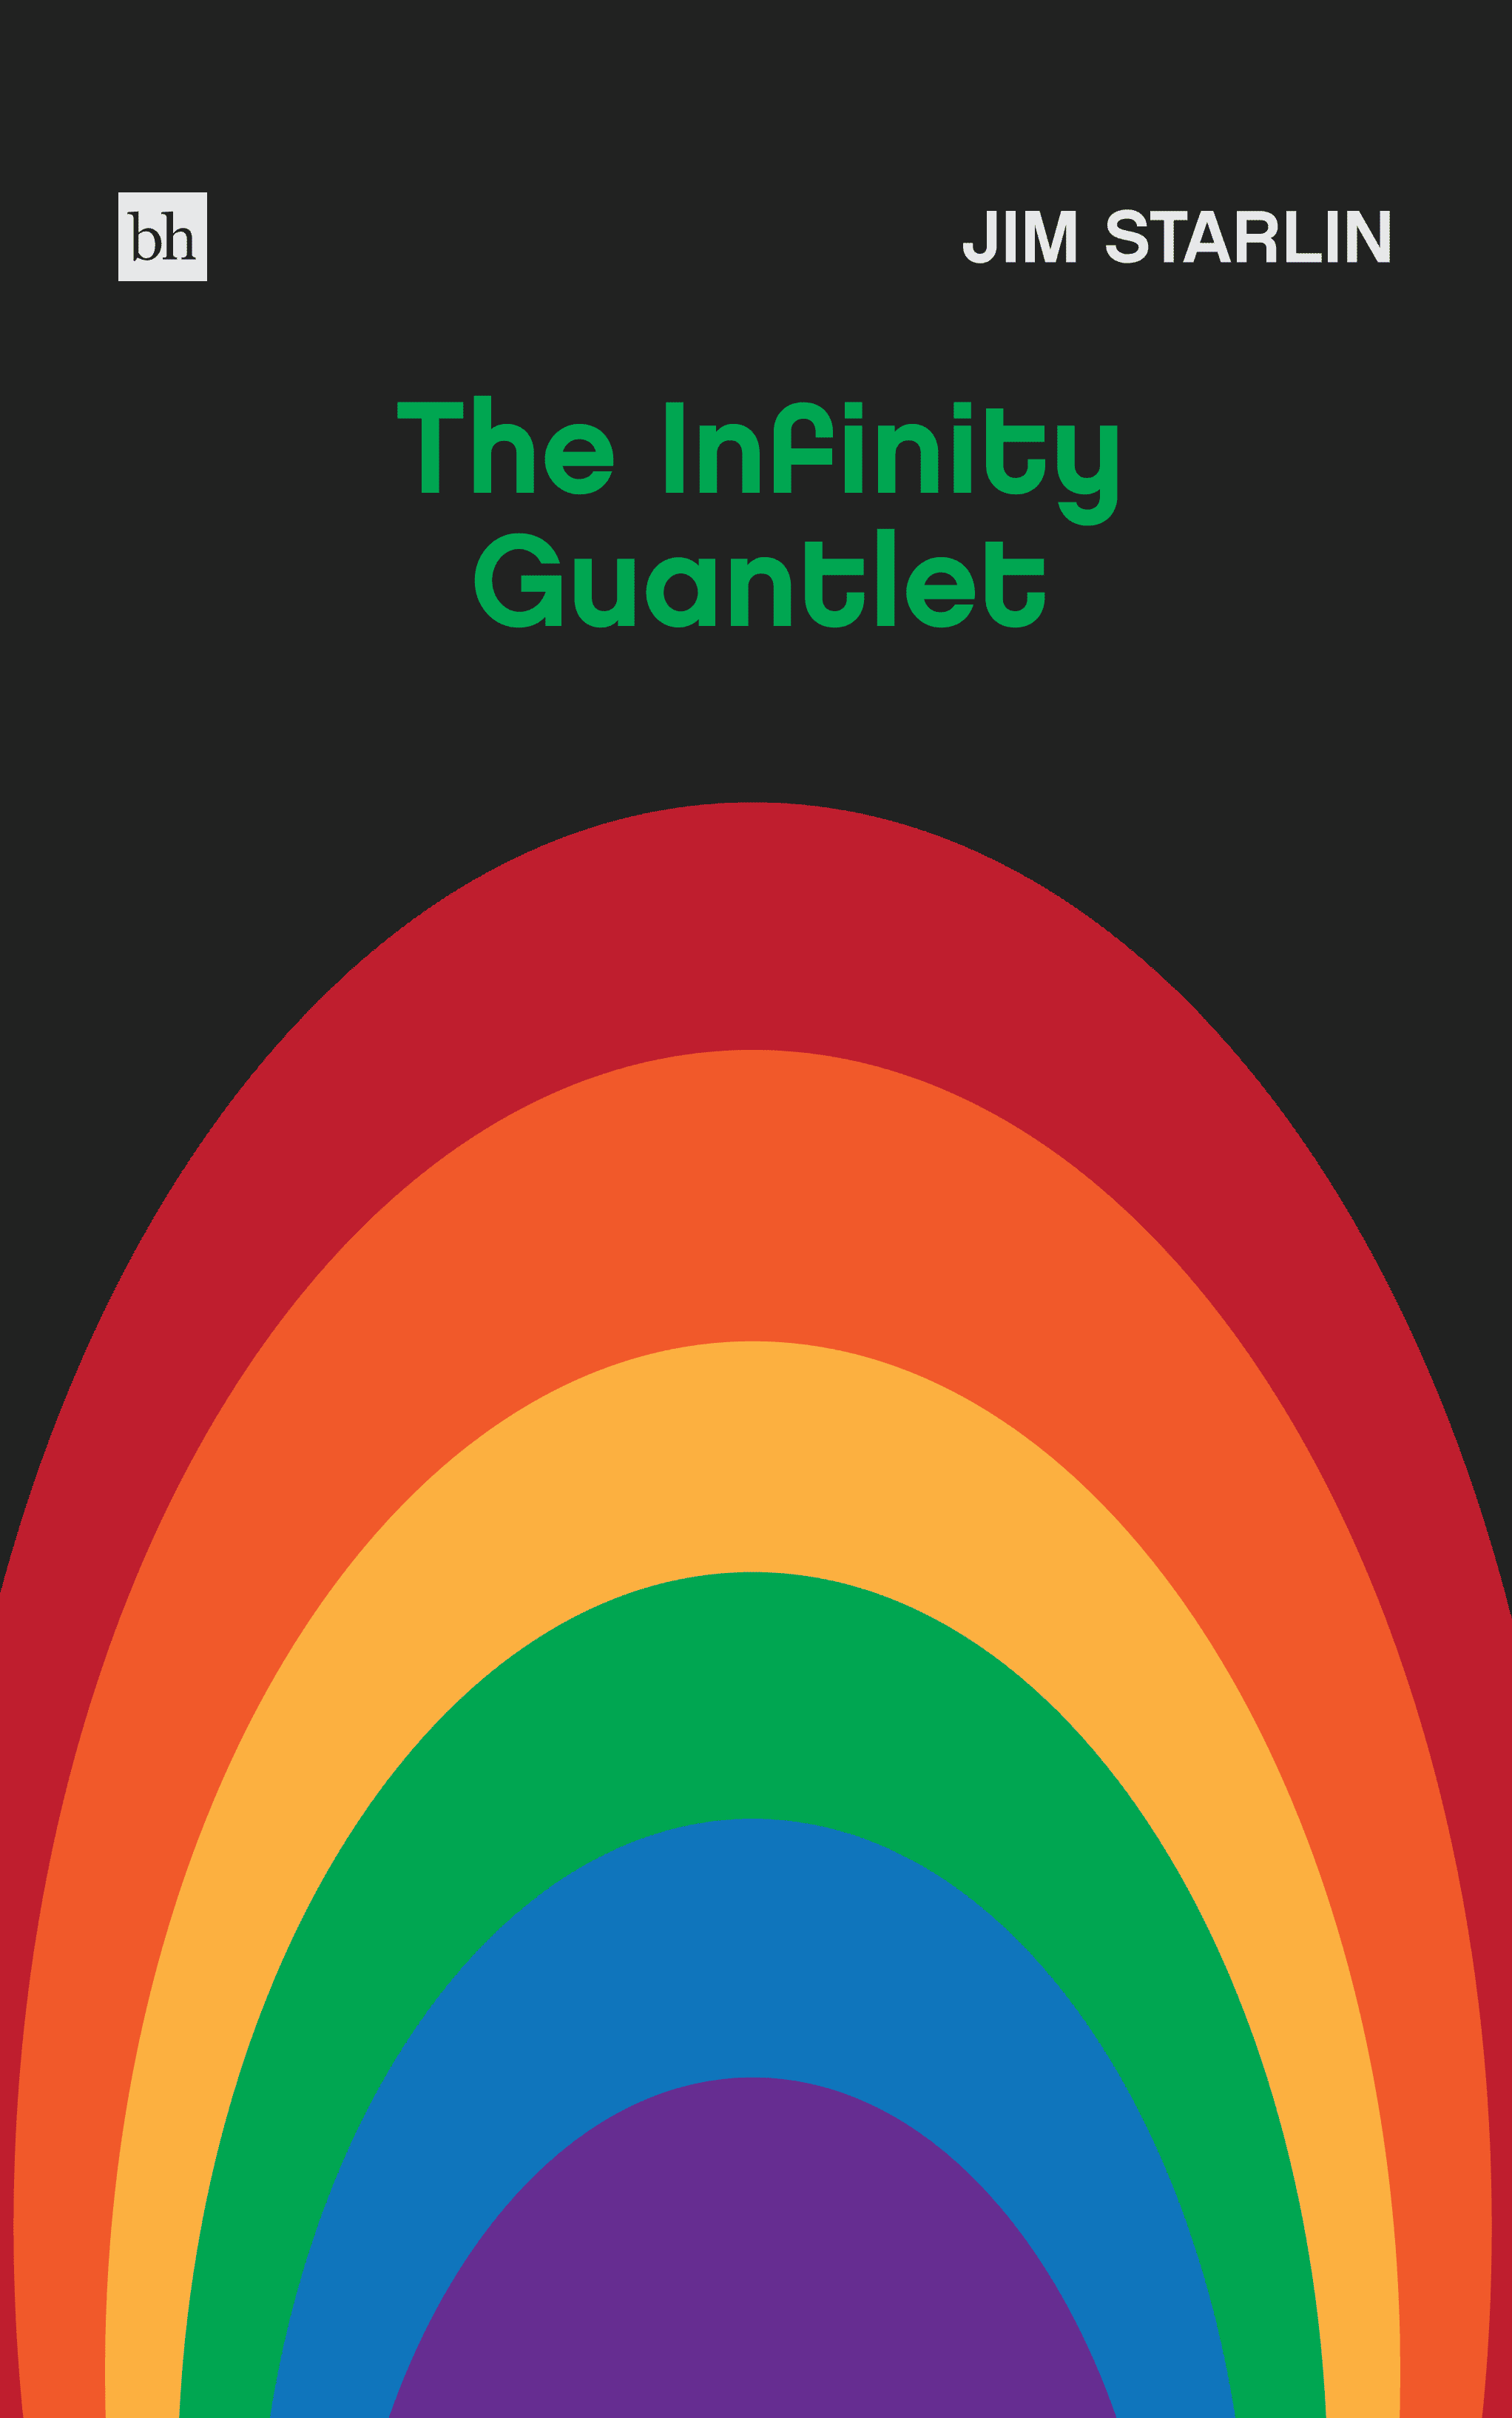 Book cover mock thumbnail for The Infinity Gauntlet